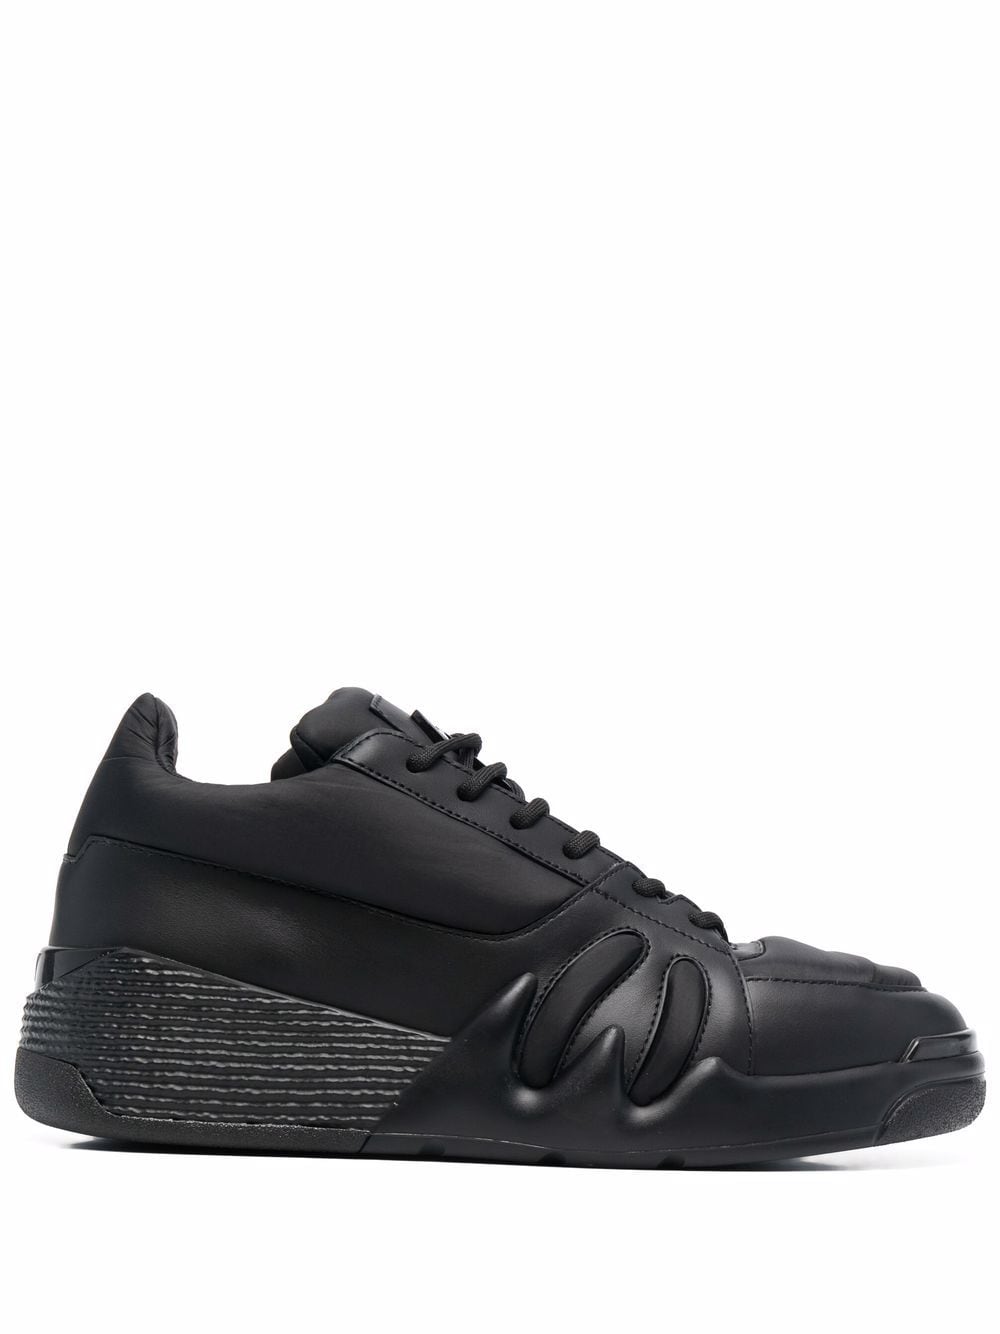 Image 1 of Giuseppe Zanotti chunky low-top leather sneakers